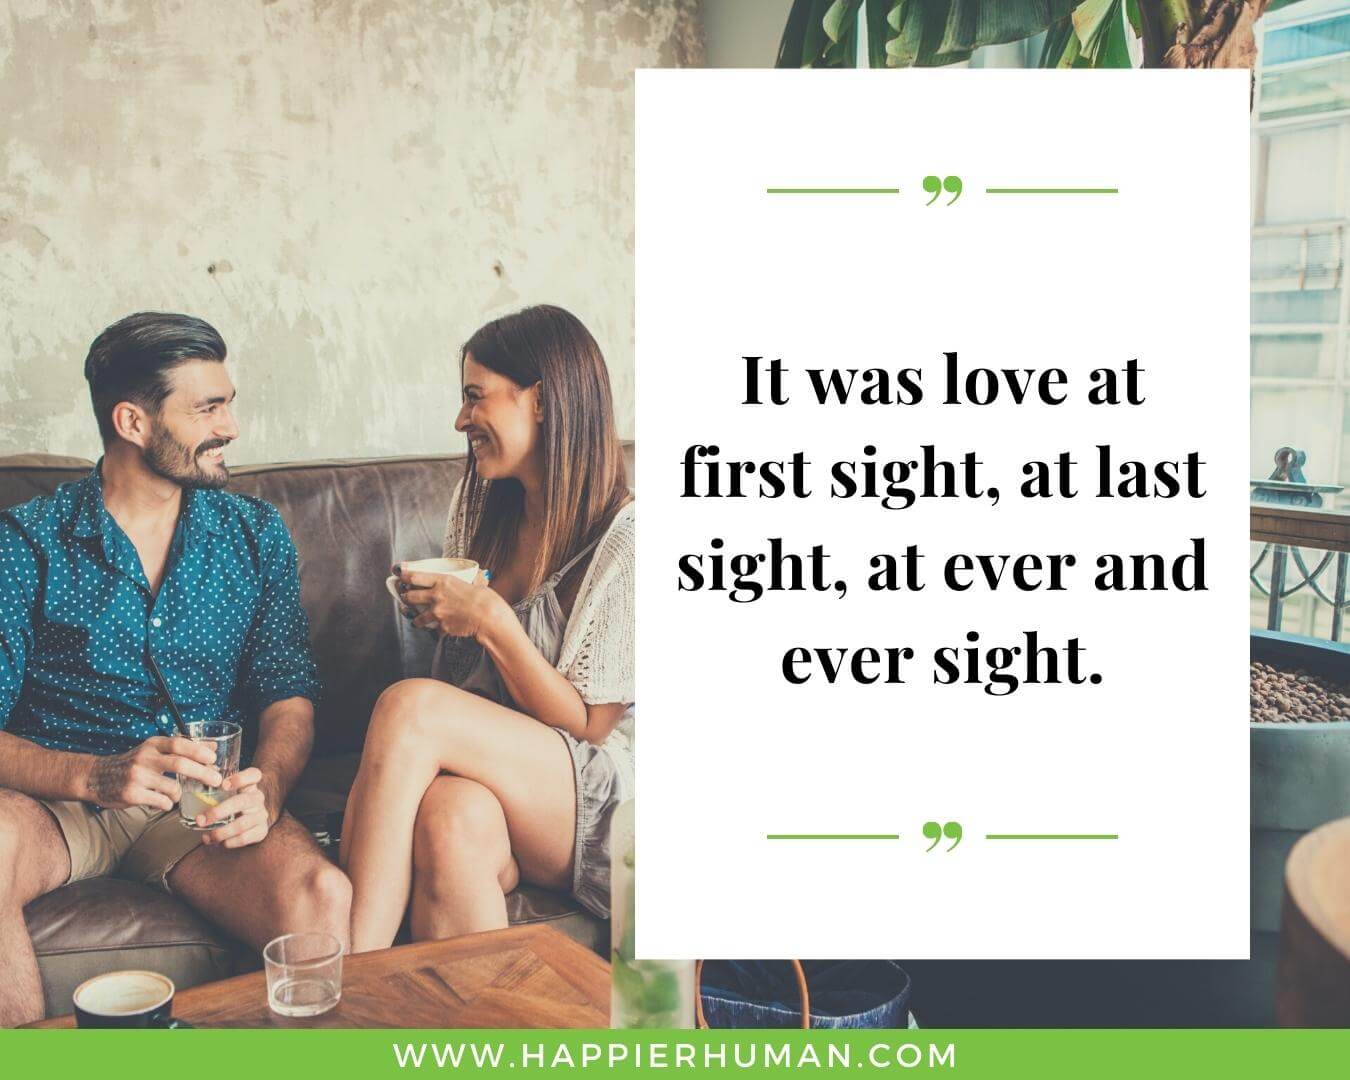 Short relationship quotes “It was love at first sight, at last sight, at ever and ever sight.”